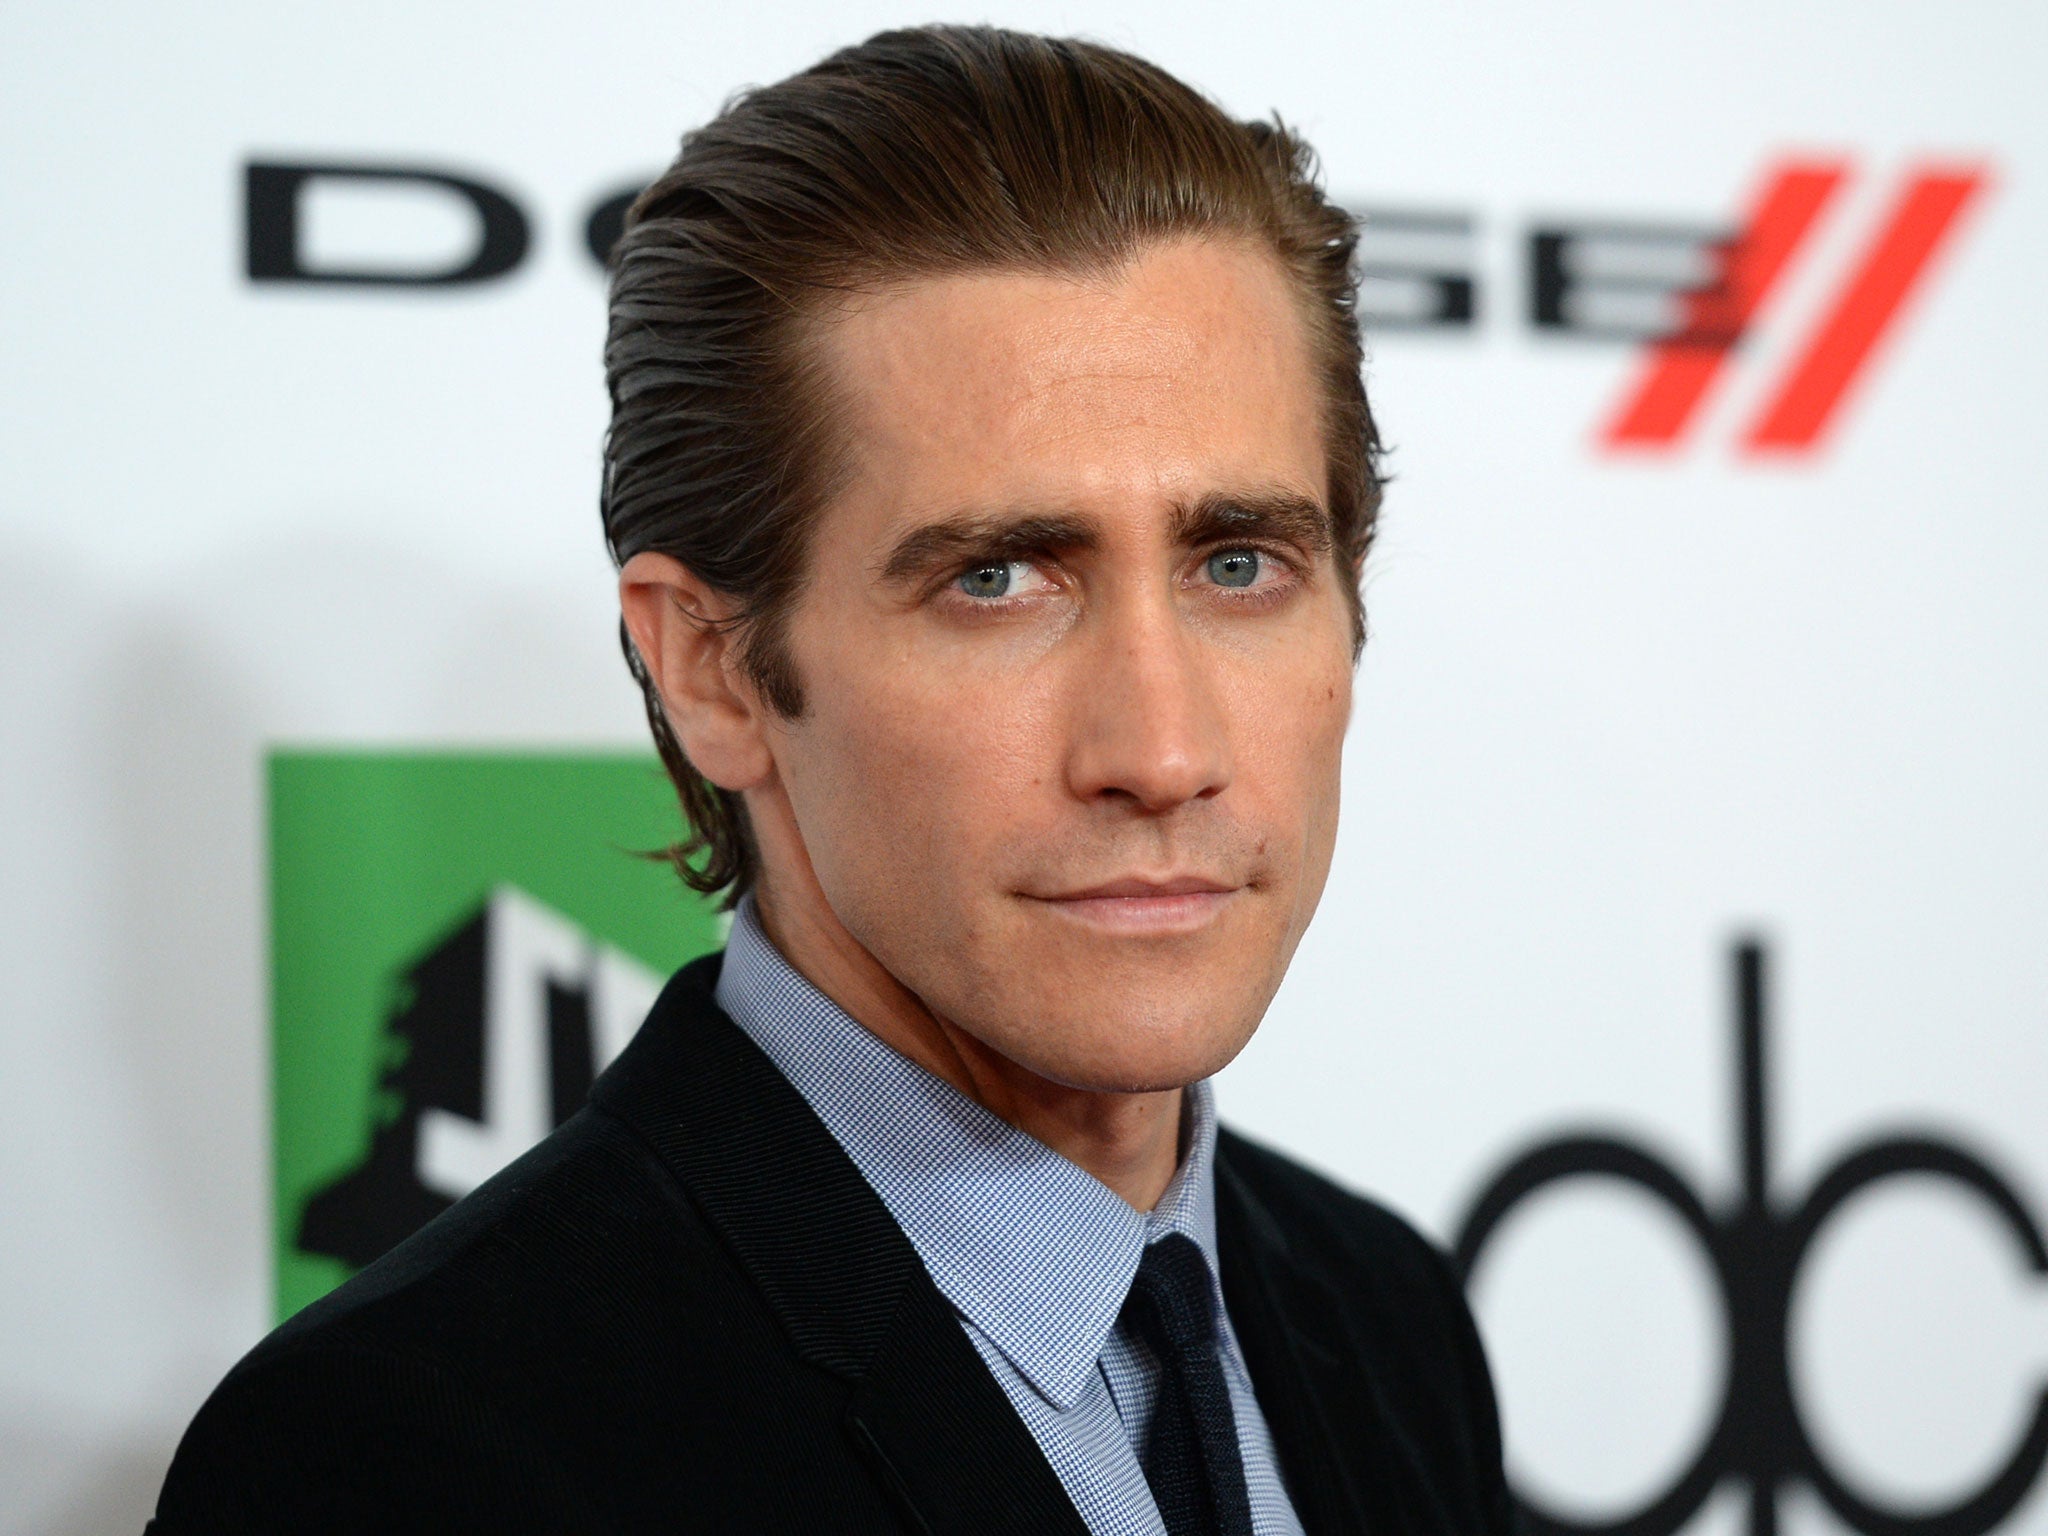 Jake Gyllenhaal has revealed that he gave a terrible audition for the part of Frodo in Lord of the Rings